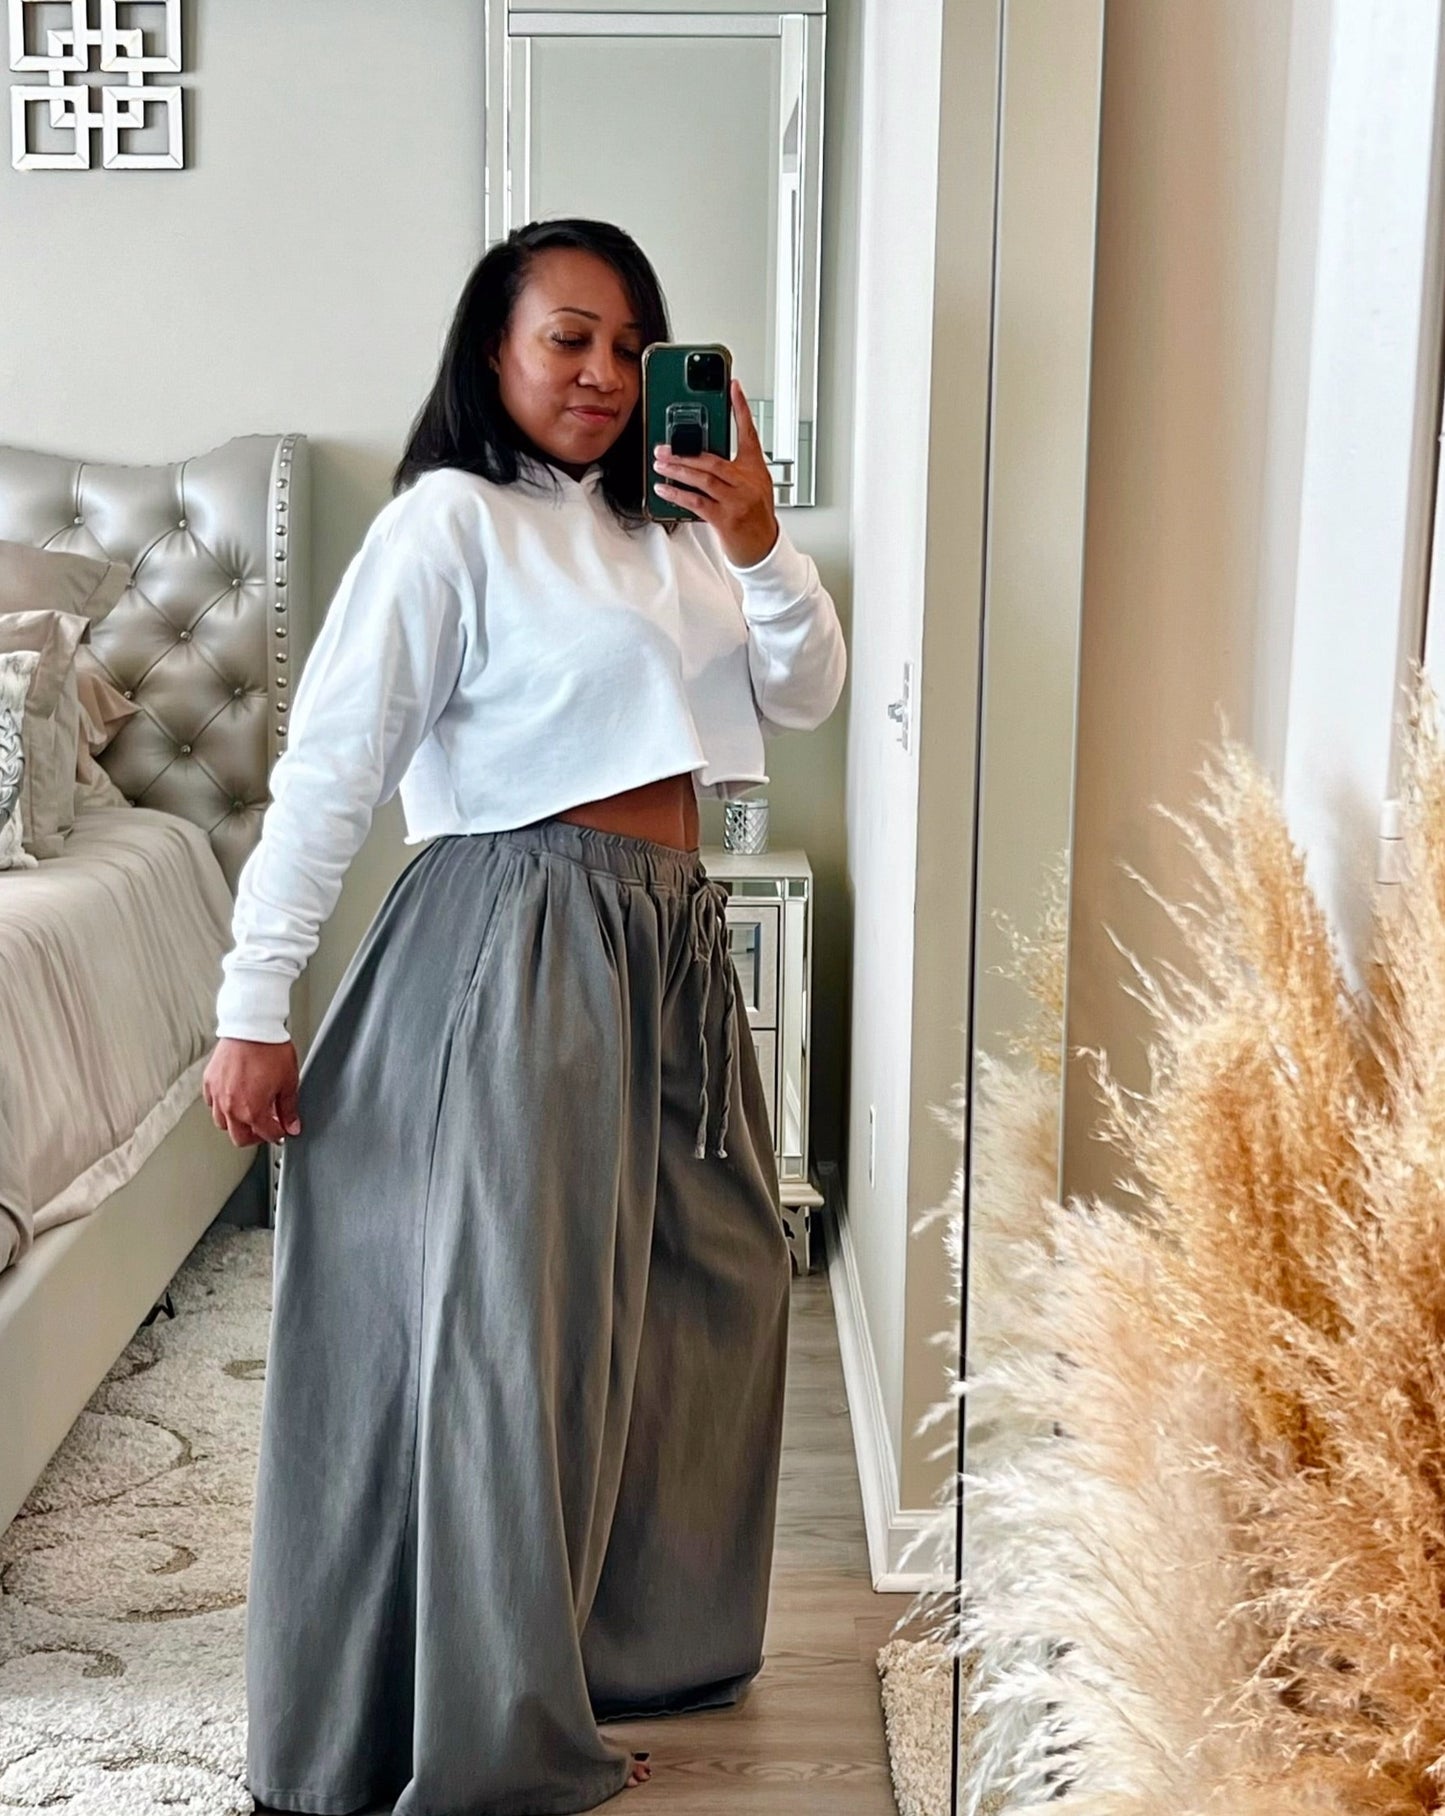 Dioor Denim Wide Leg Pants ***LG FITS PLUS! READ FULL DESCRIPTION BEFORE ORDERING, TO ORDER CORRECT SIZE!***